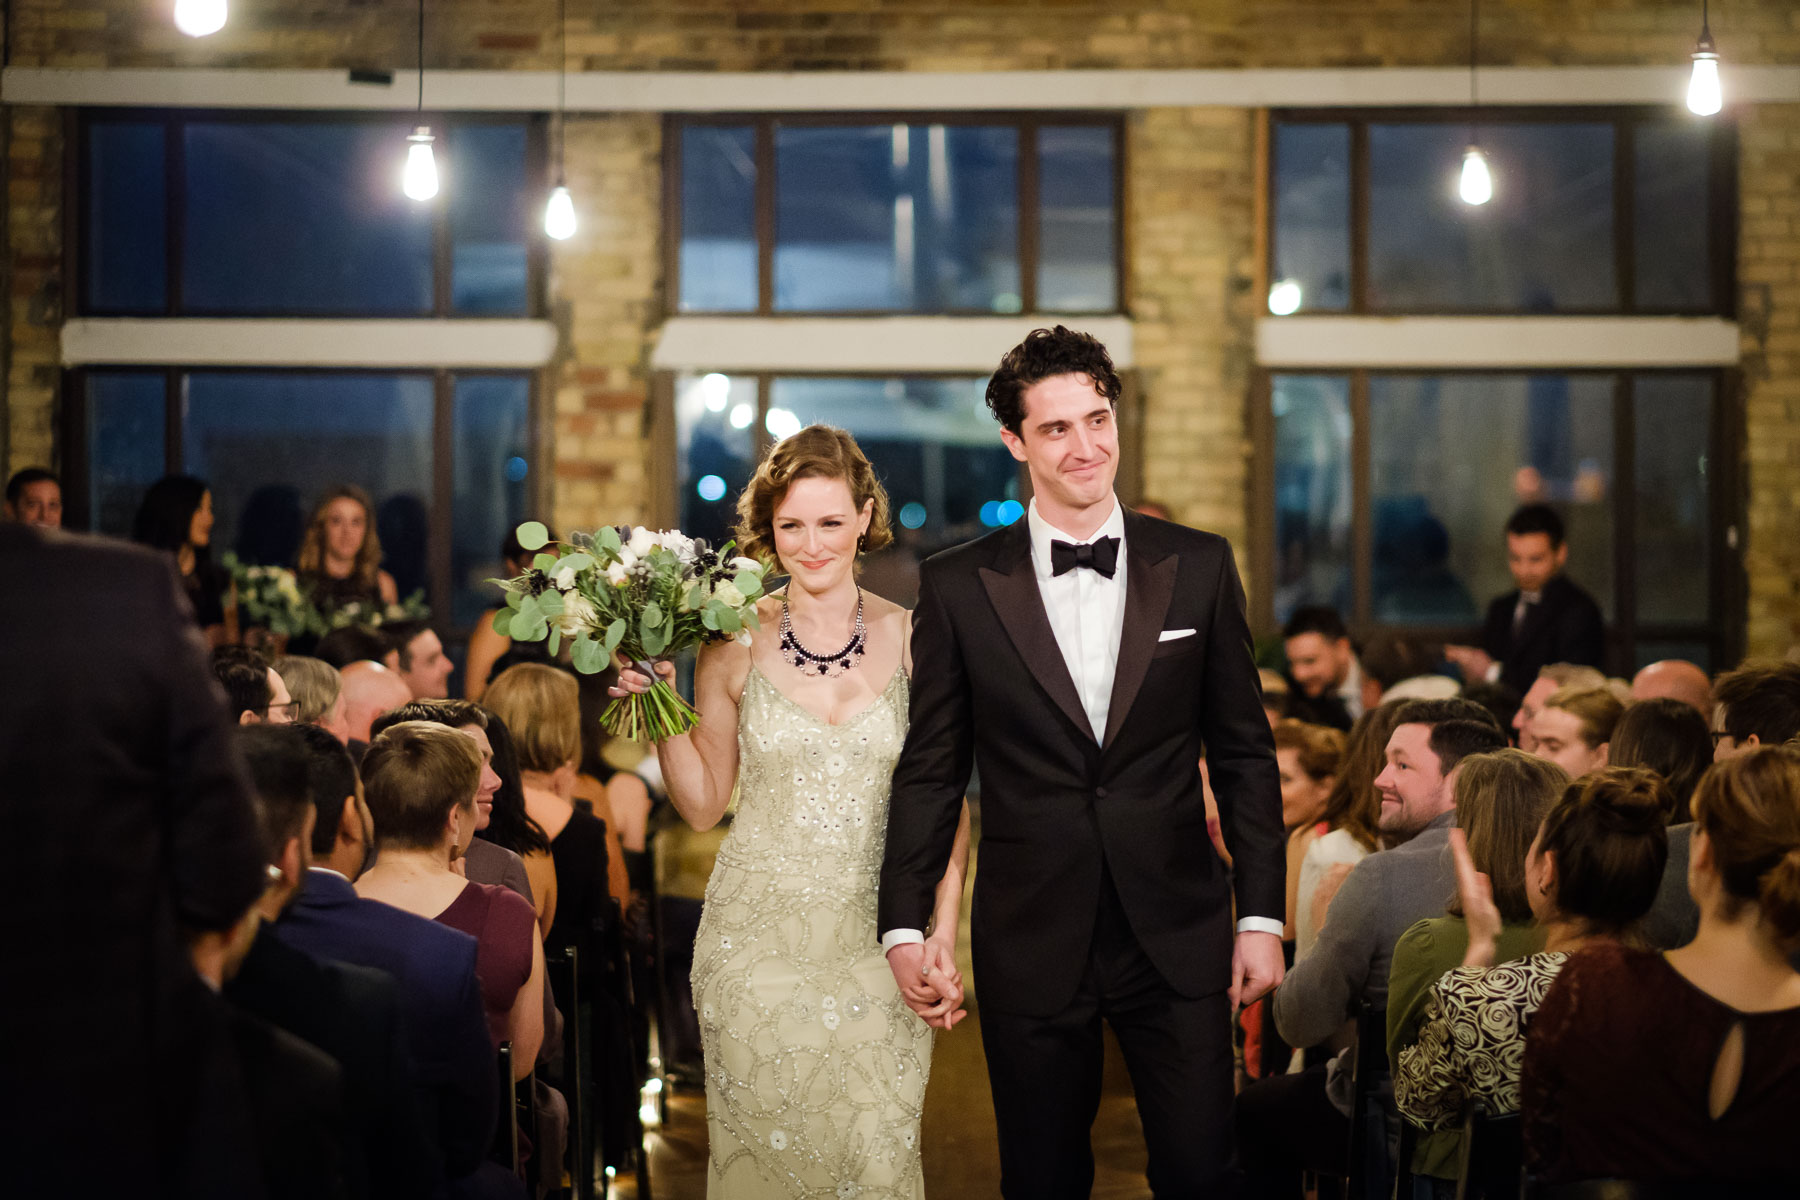 Bride and groom walk down the aisle at The Burroughes building wedding.